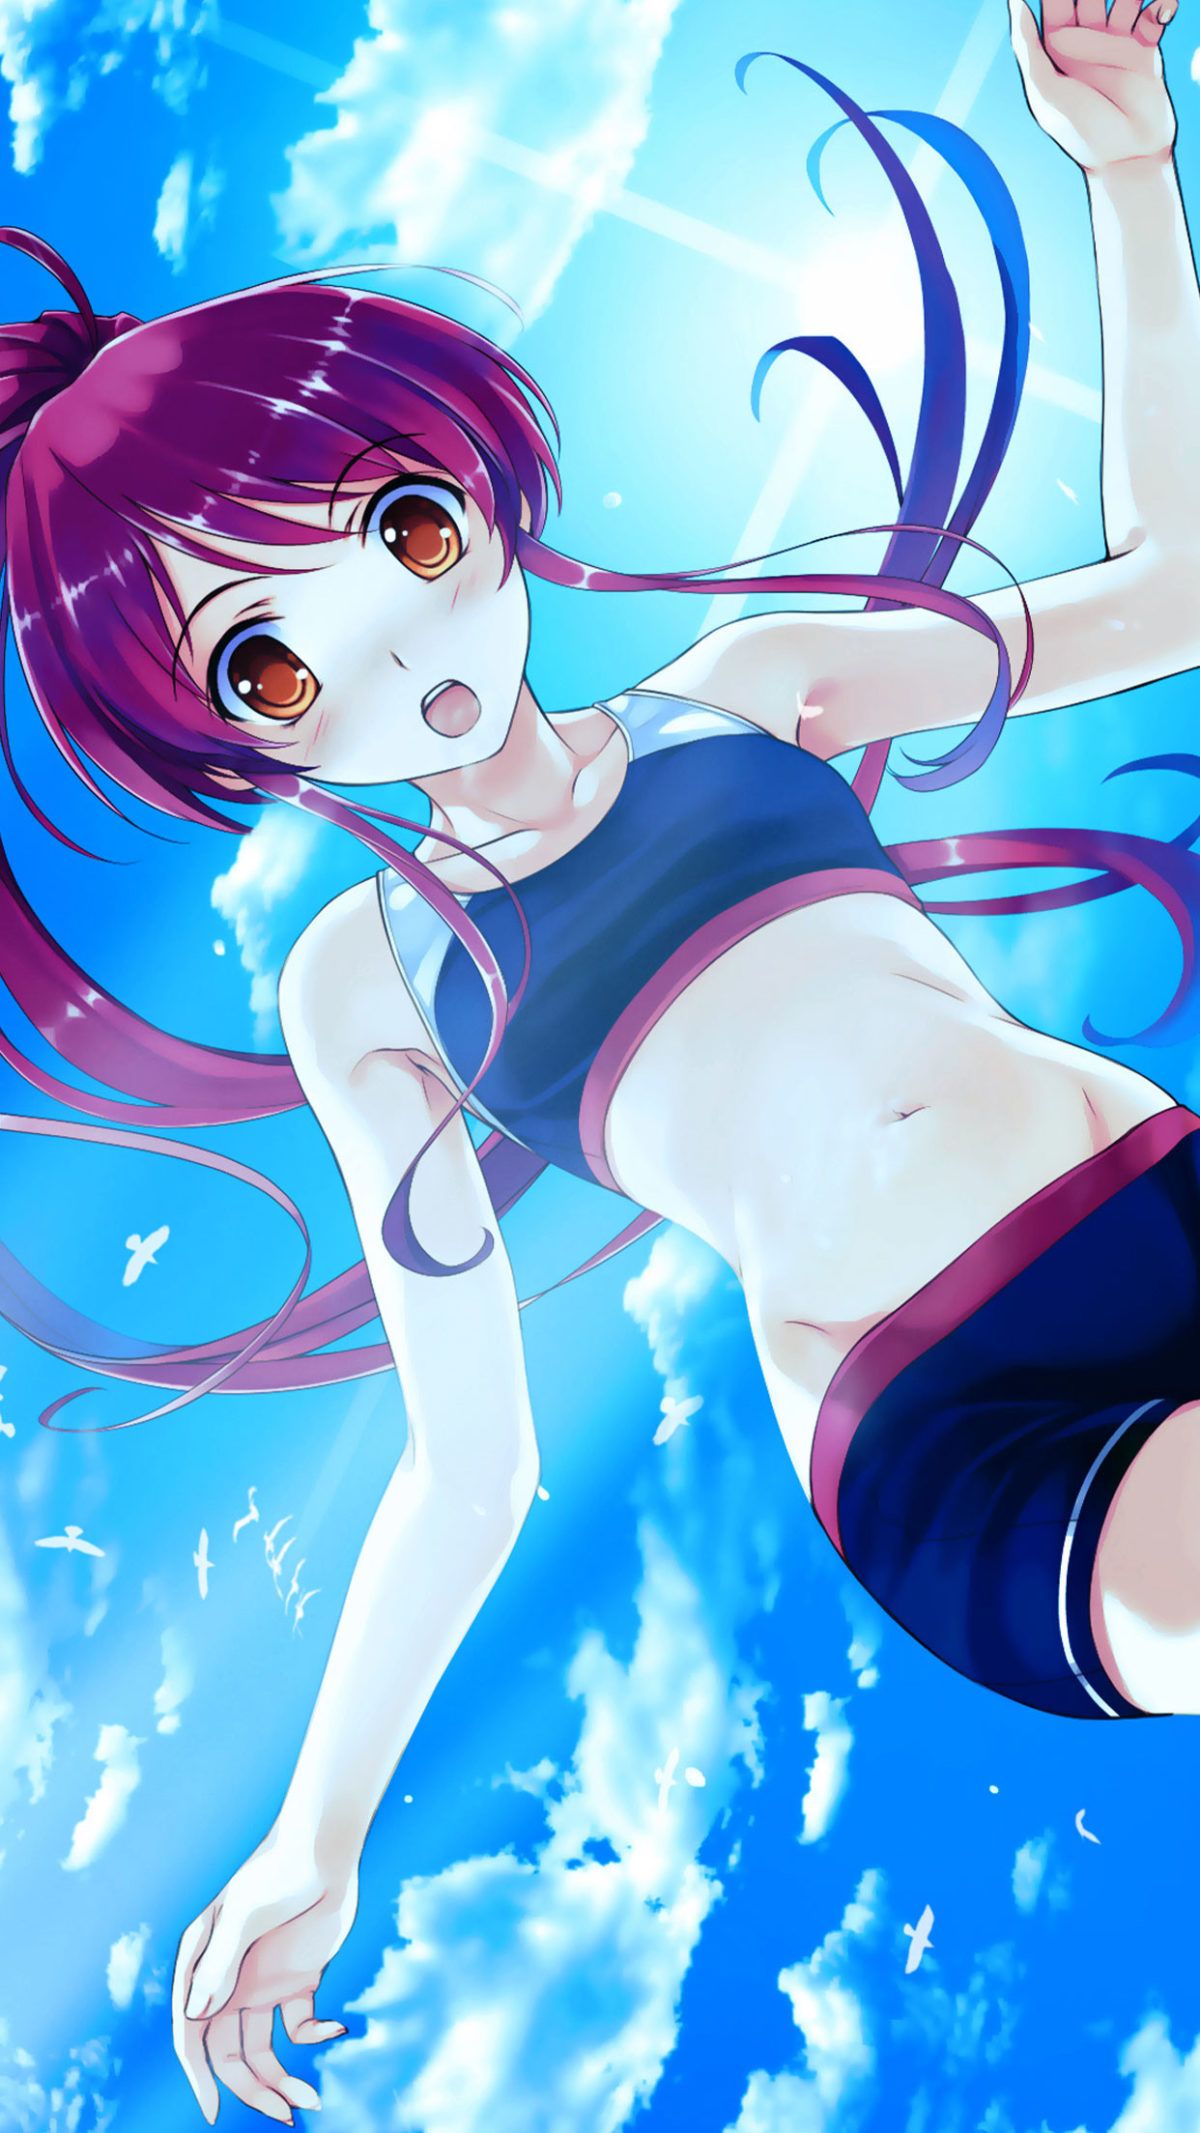 Anime girl wallpaper for #iPhone and #Android #anime #girl